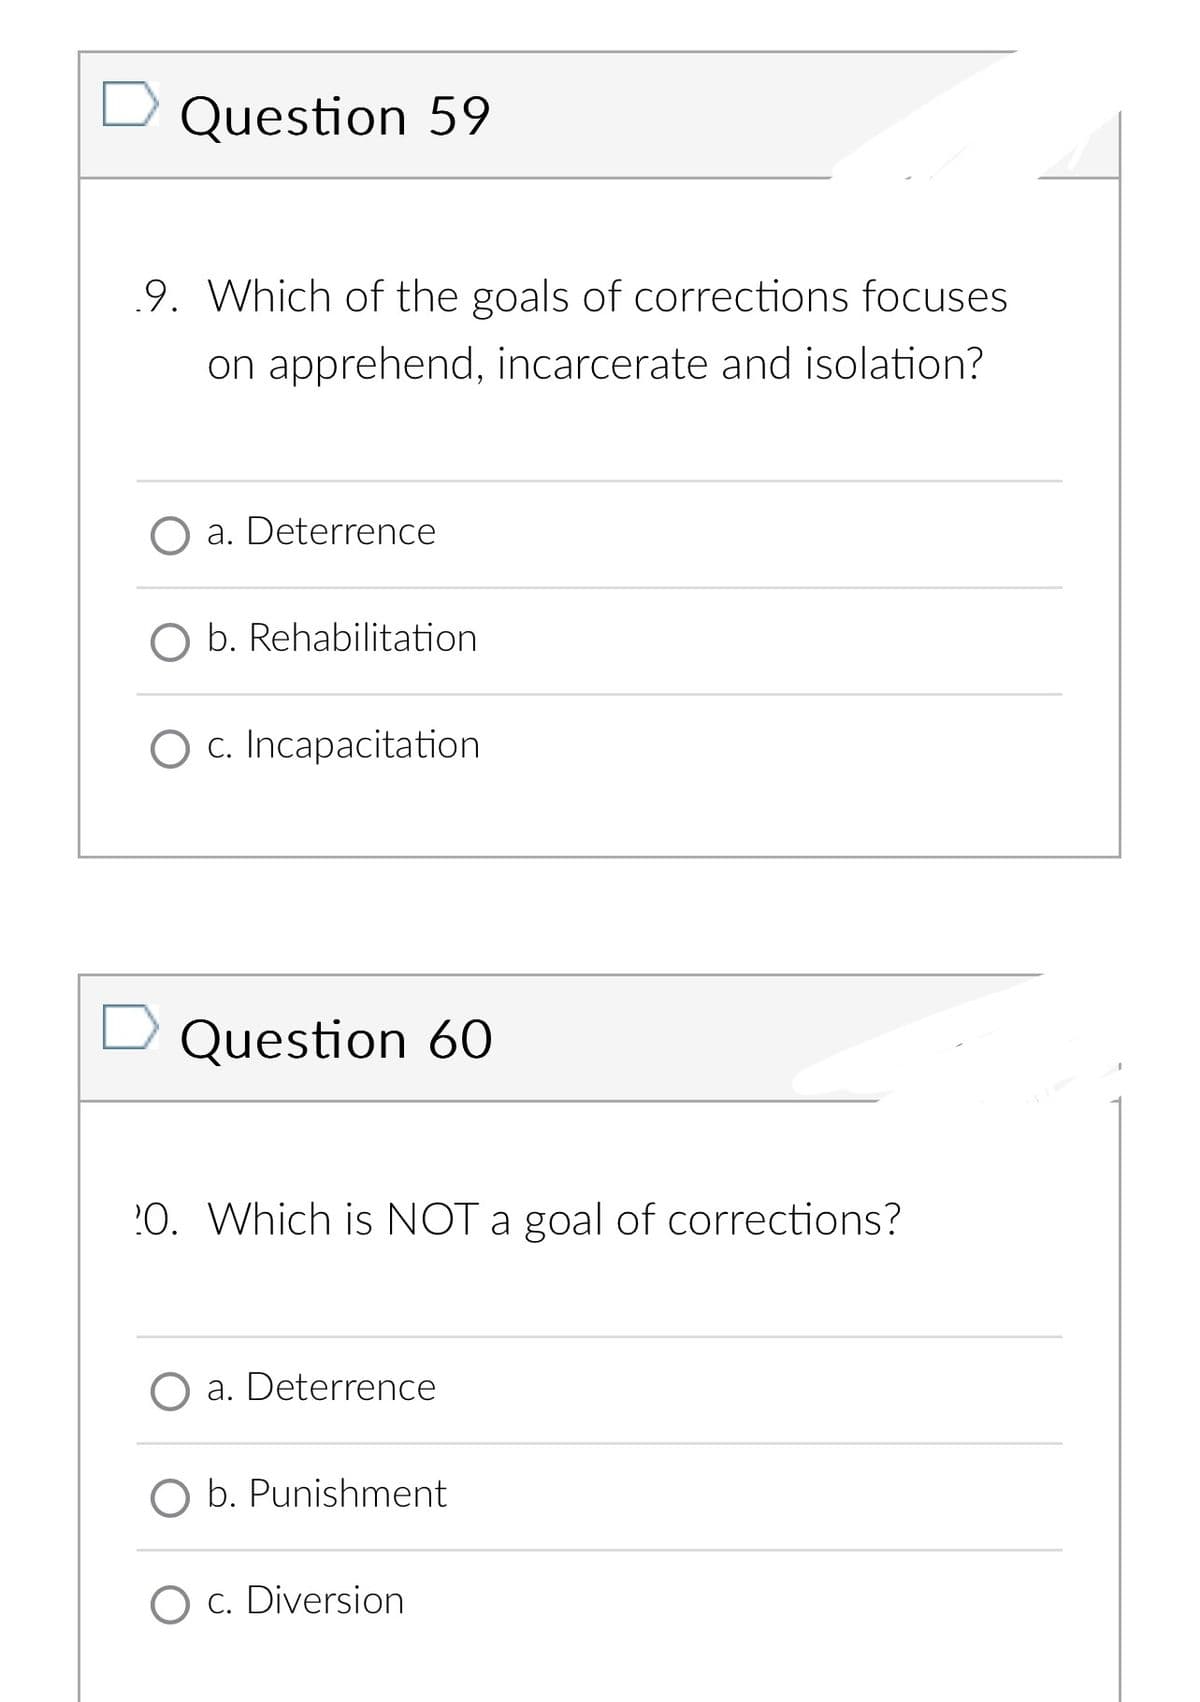 Question 59
9. Which of the goals of corrections focuses
on apprehend, incarcerate and isolation?
a. Deterrence
O b. Rehabilitation
O c. Incapacitation
Question 60
20. Which is NOT a goal of corrections?
a. Deterrence
O b. Punishment
O c. Diversion